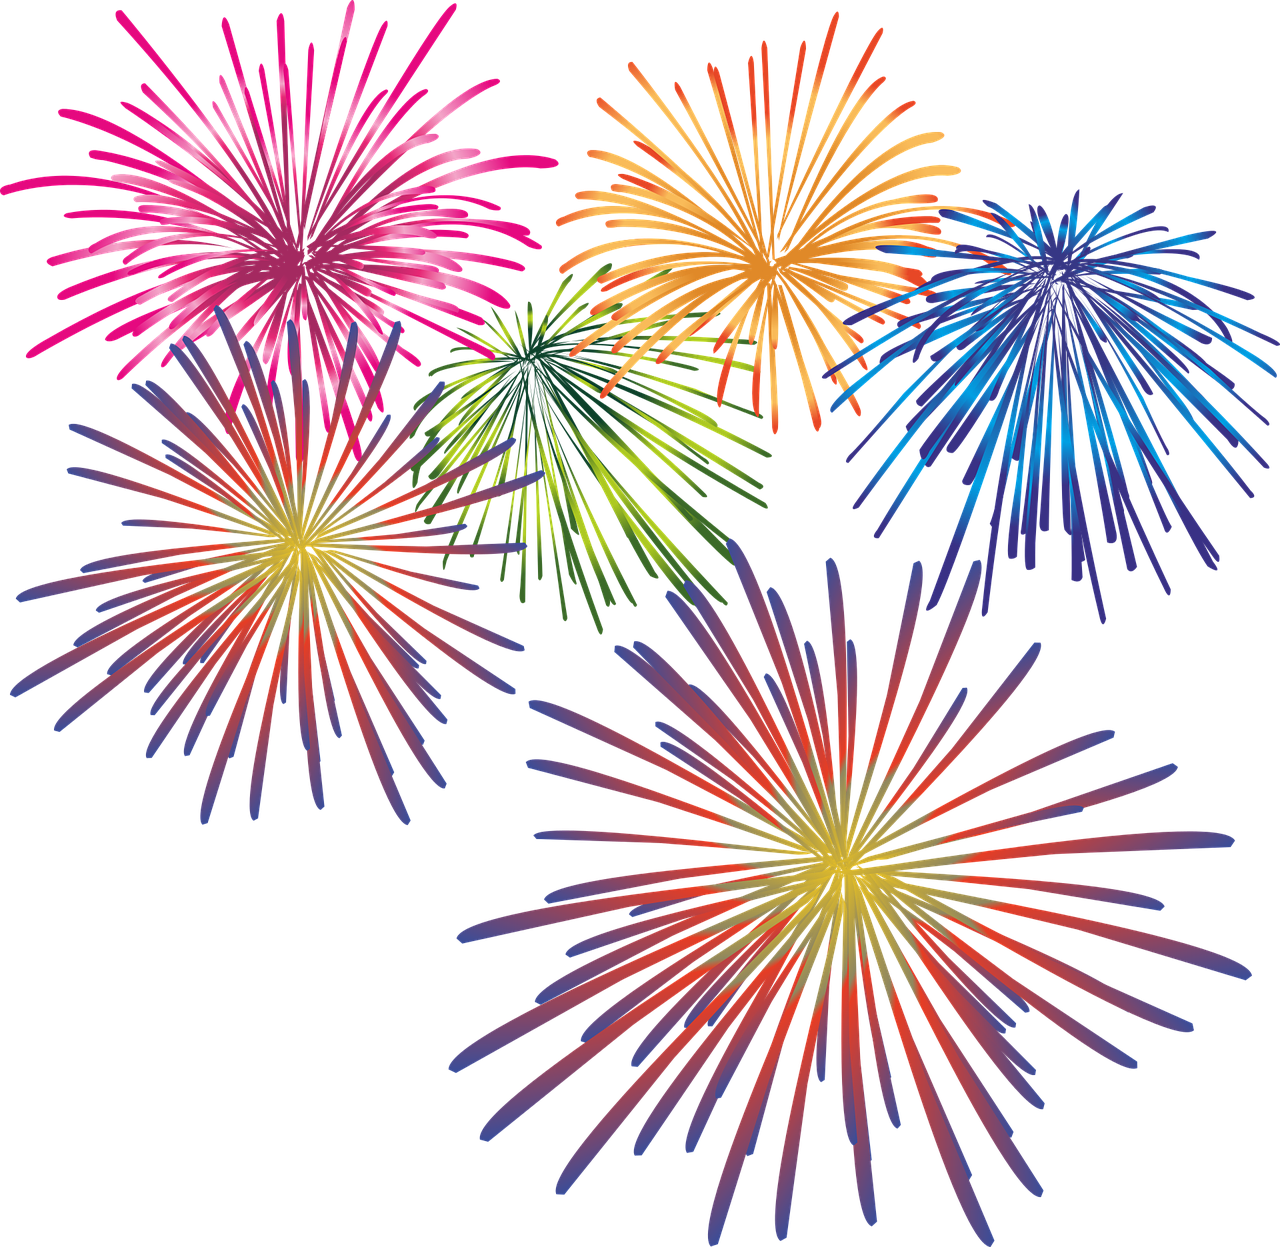 An image of fireworks to celebrate your achievements.